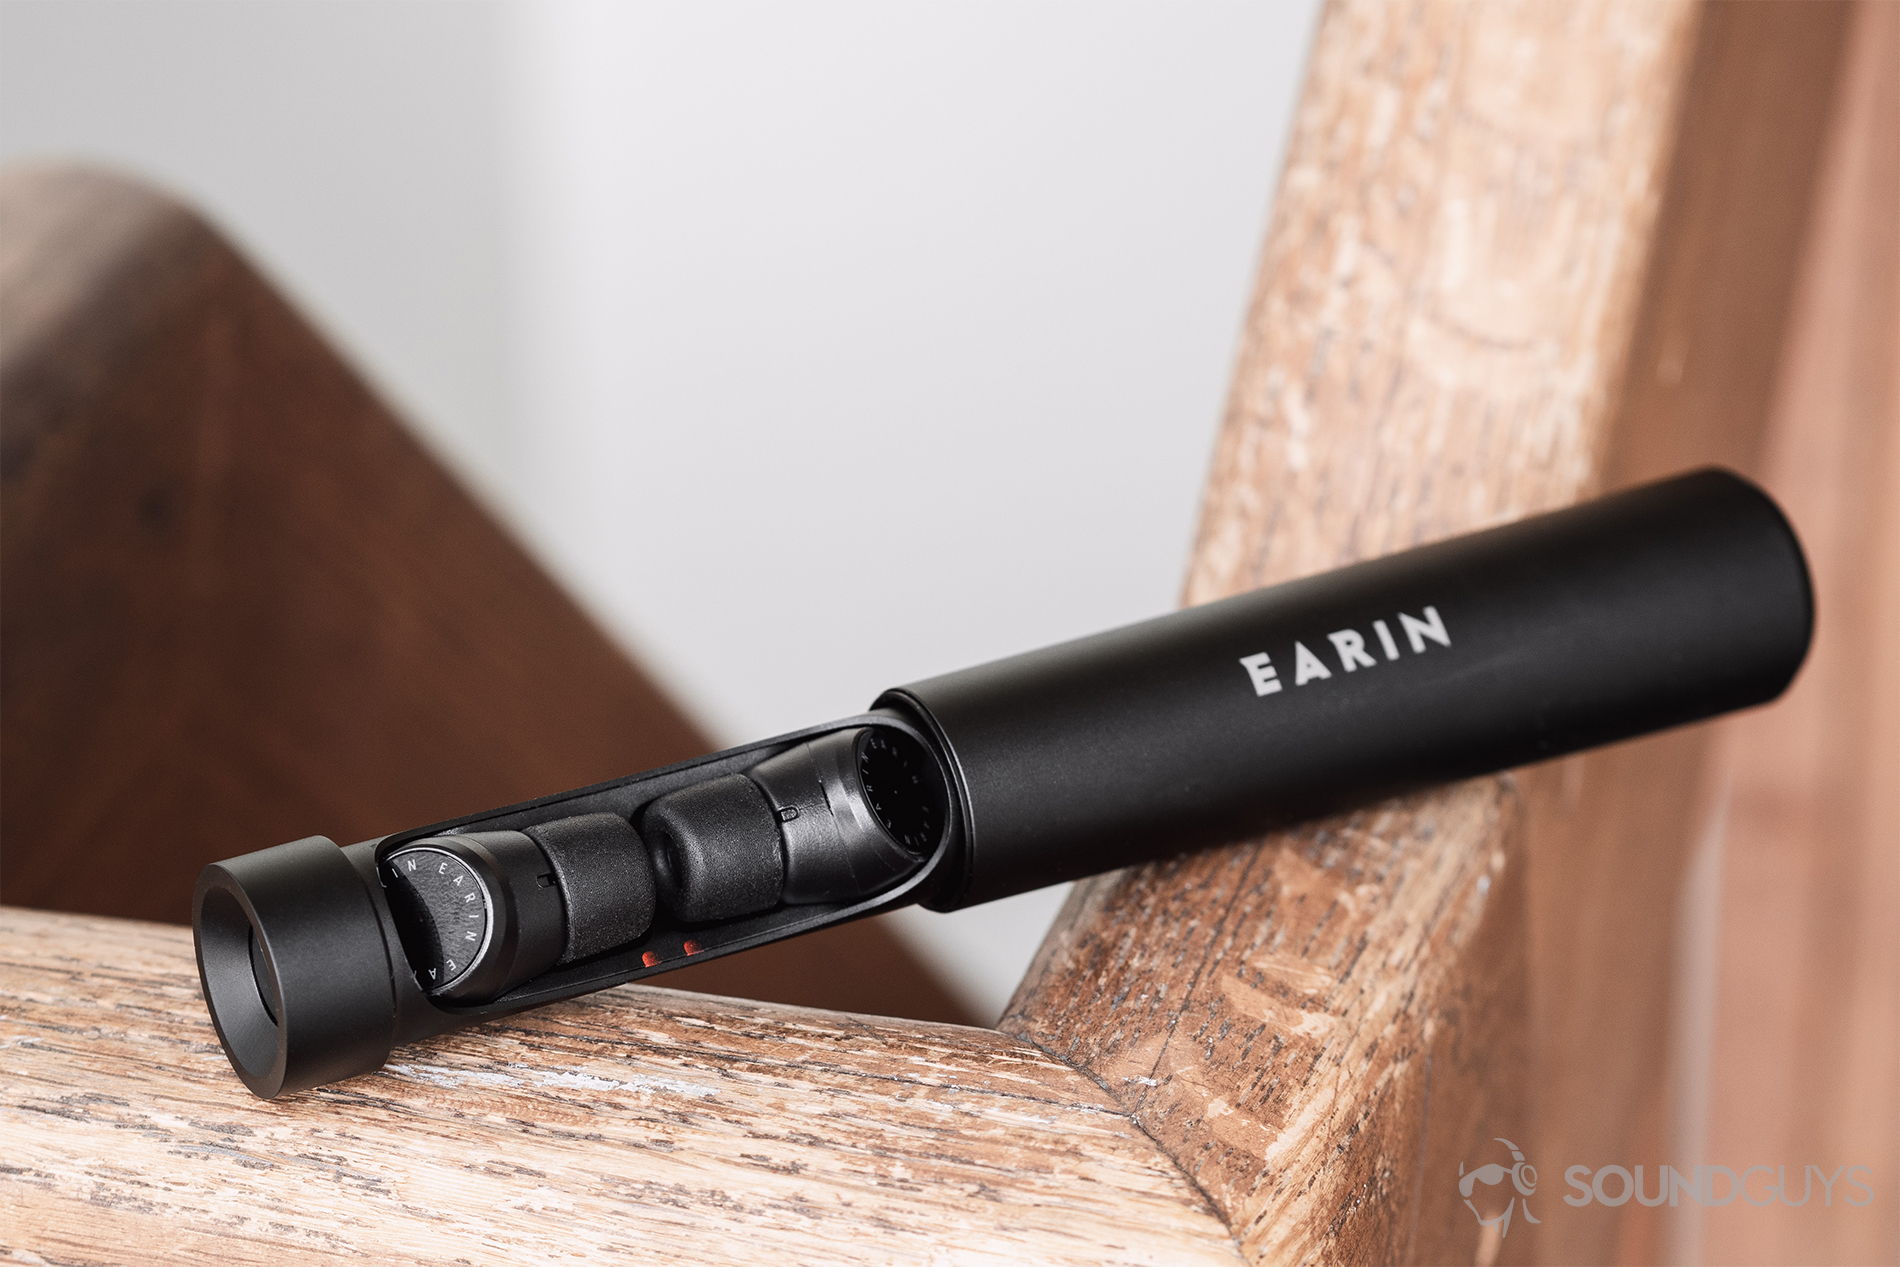 Earin M-2 review: The charging capsule is open, revealing the Earin M-2 true wireless earbuds resting on a railing.